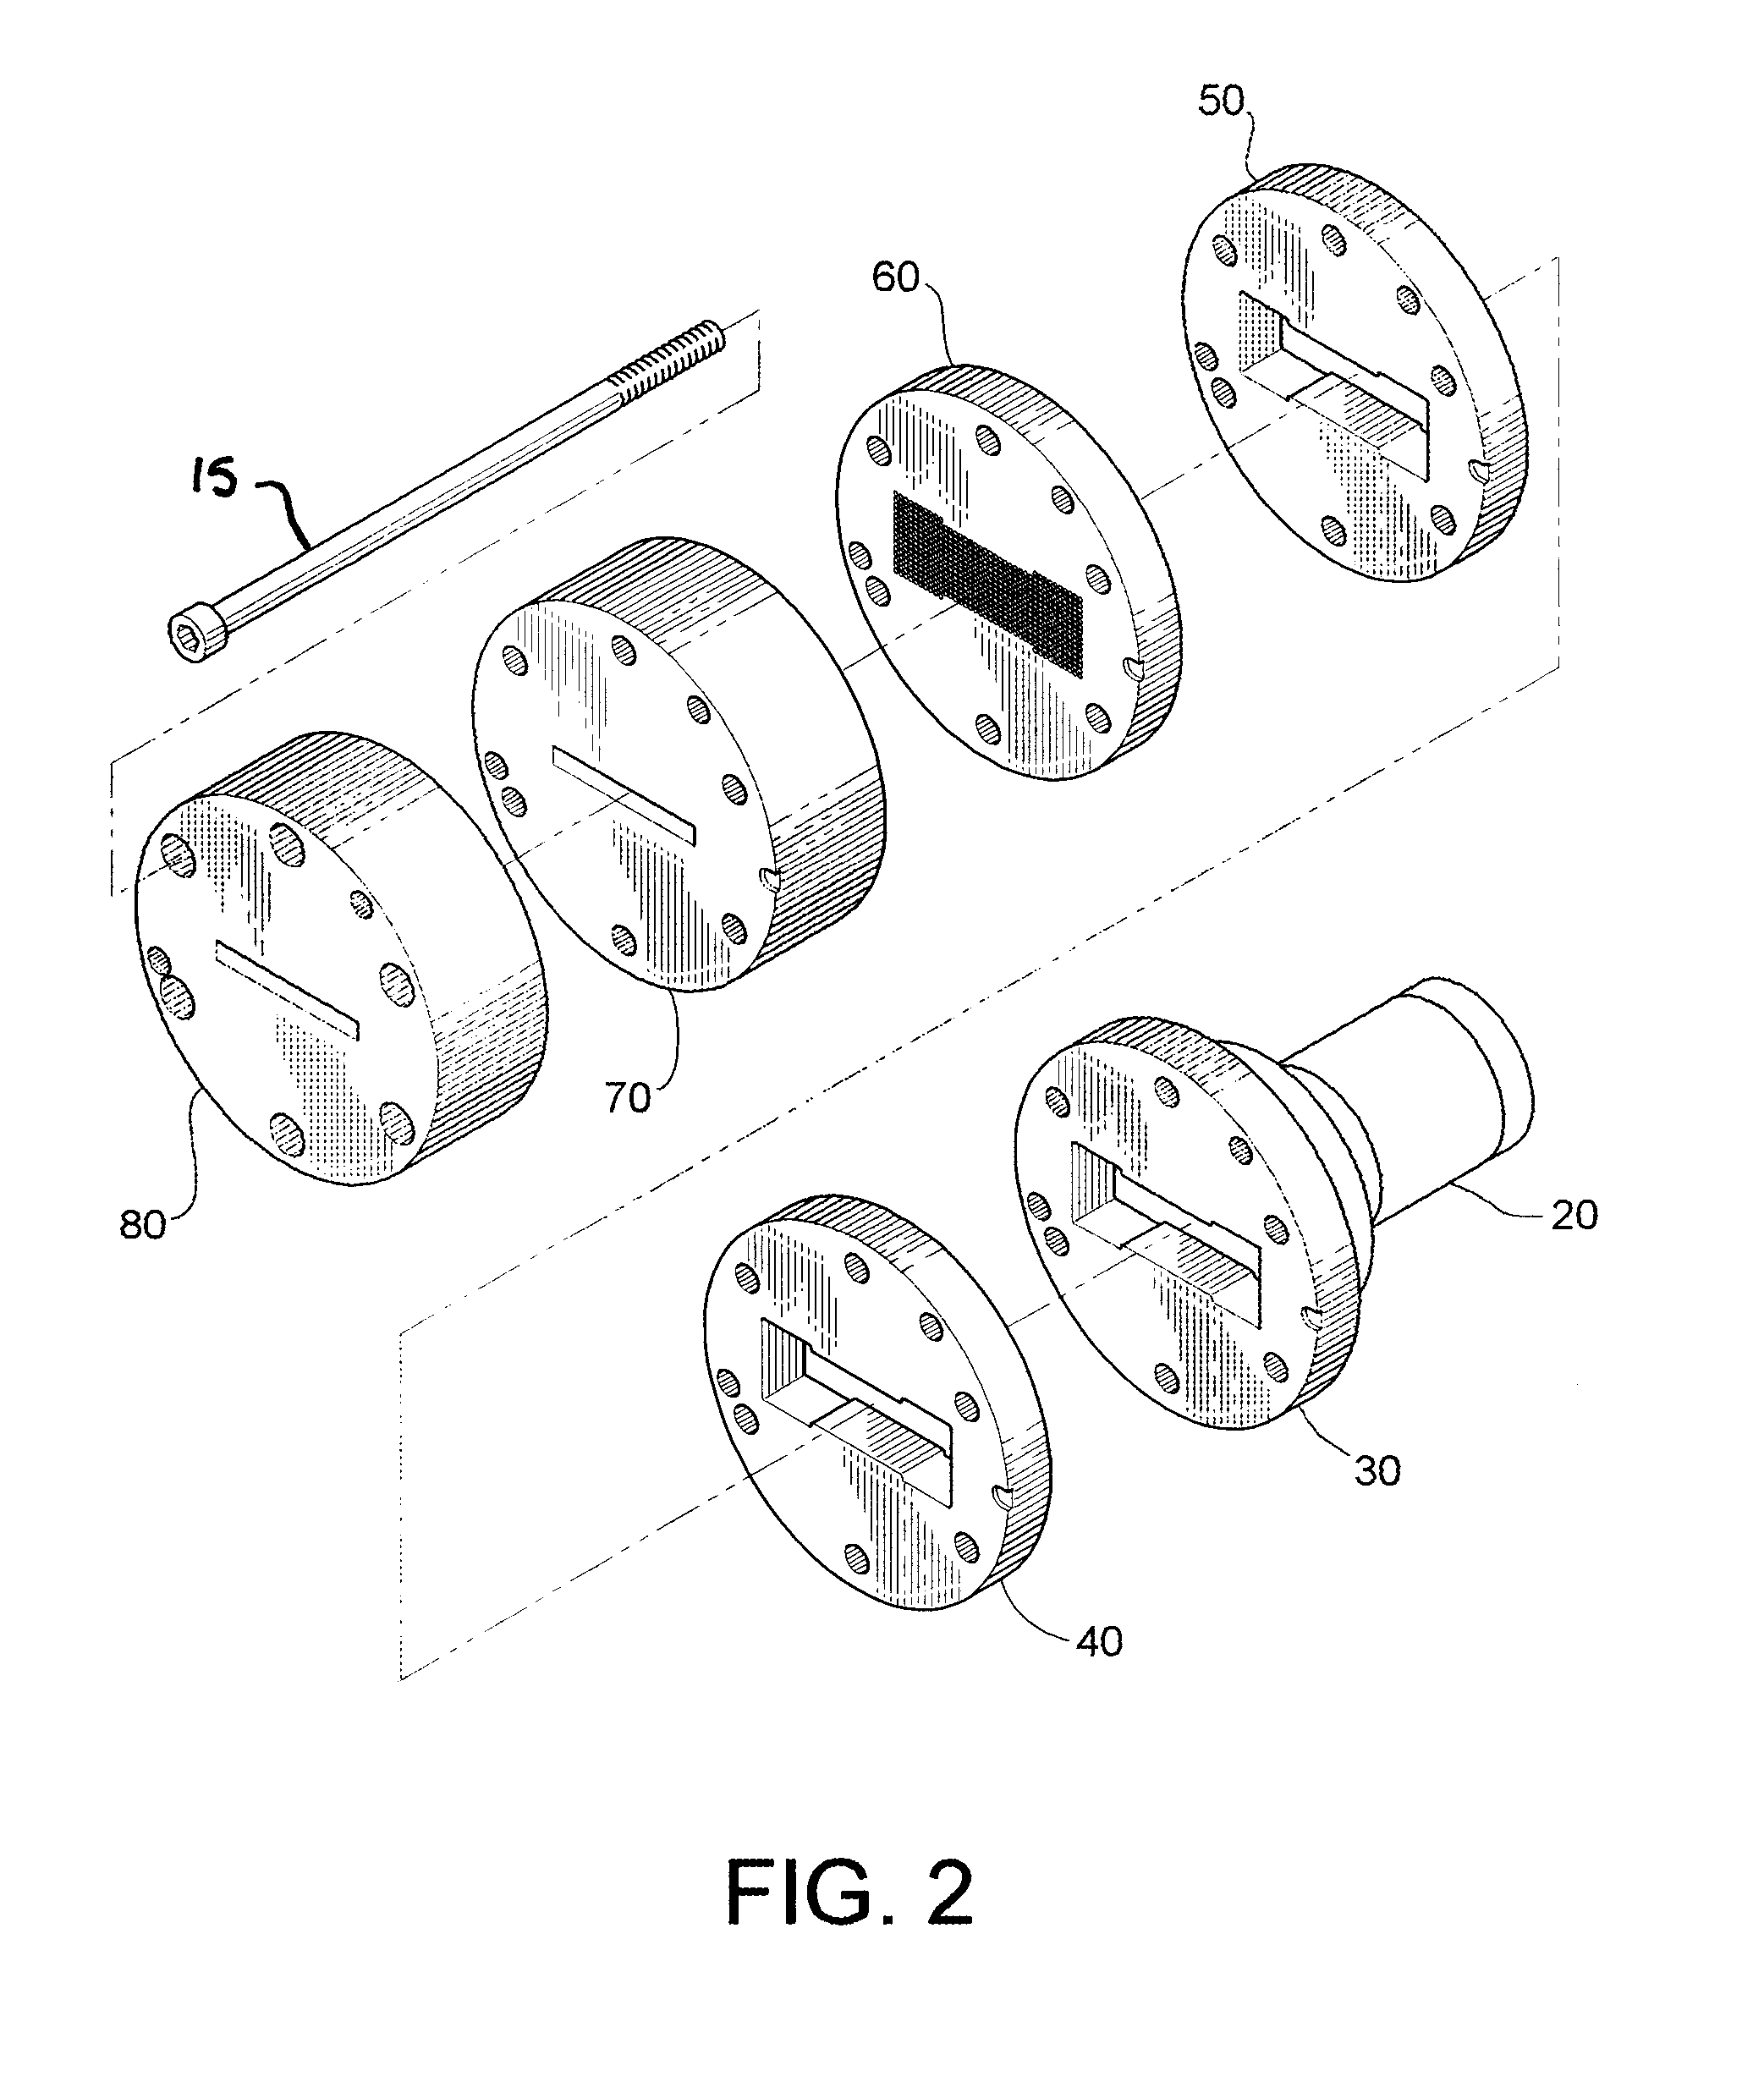 Extruded cellulose-polymer composition and system for making same